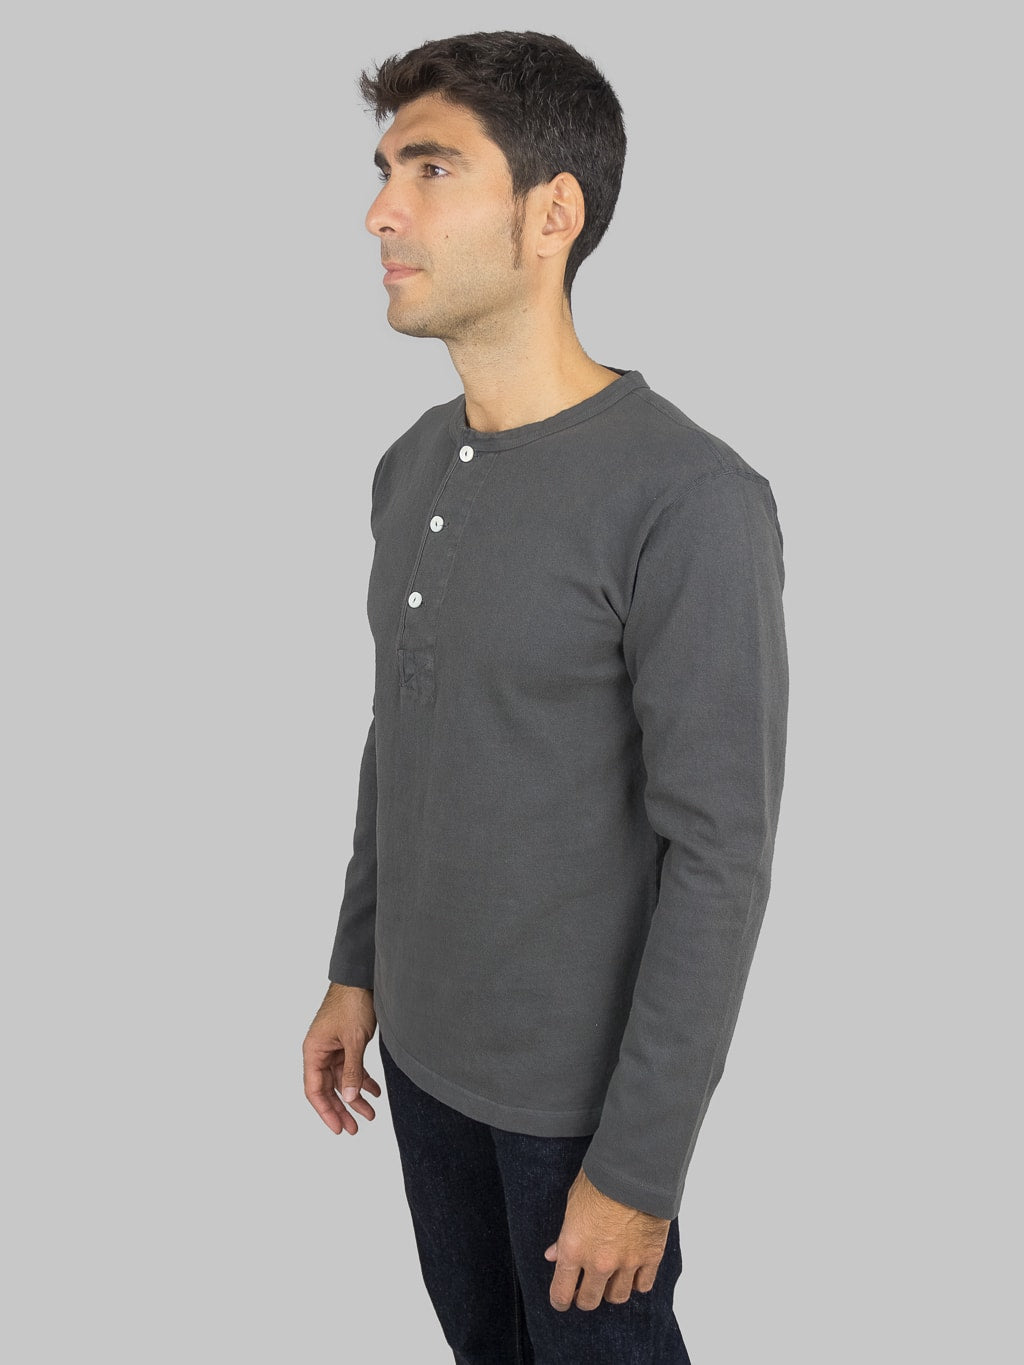 Freenote Cloth 13 Ounce Henley Long Sleeve Midnight grey model side fit